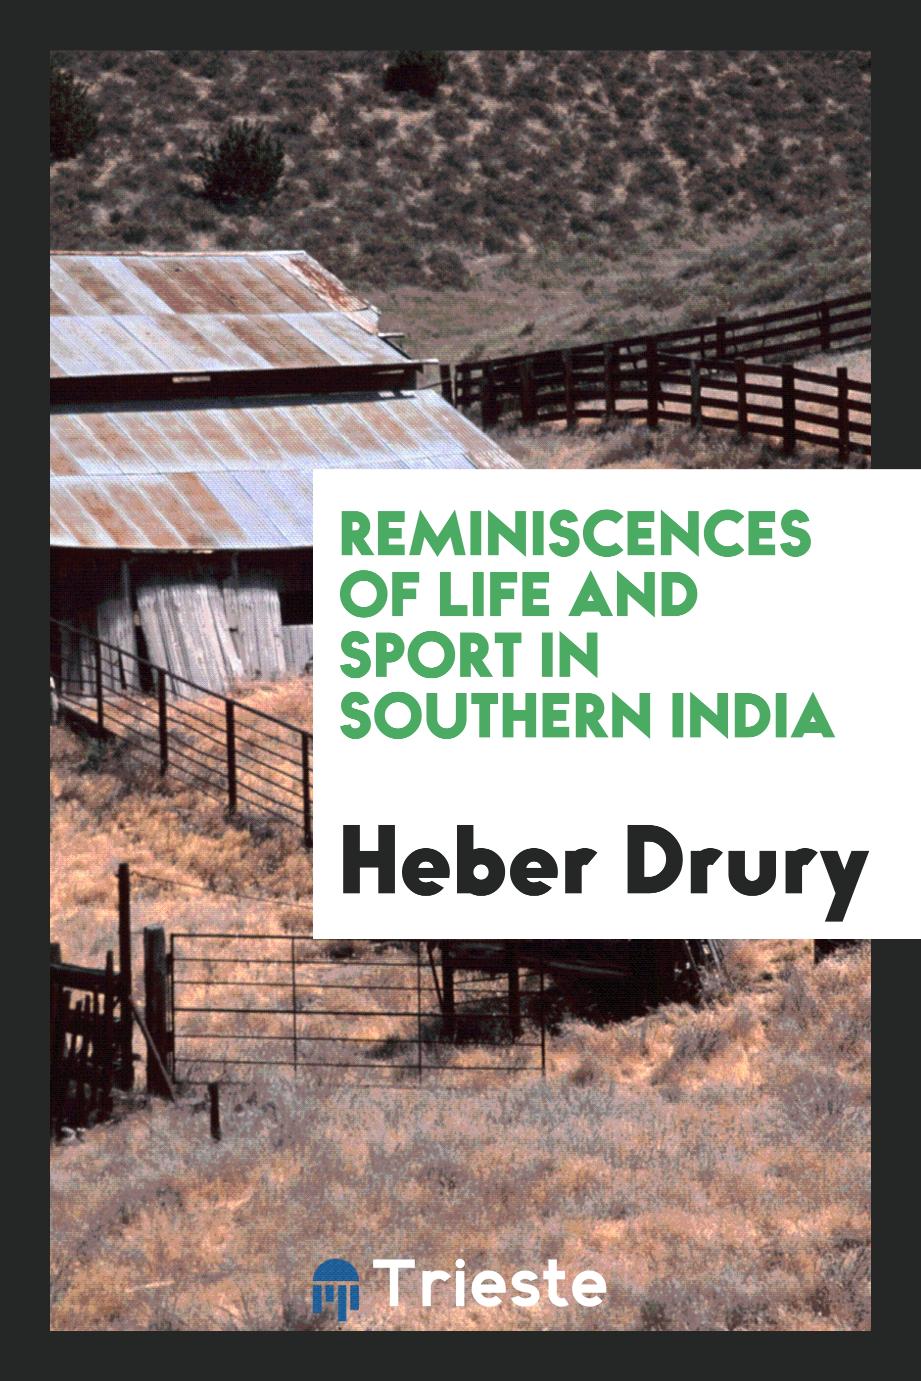 Reminiscences of life and sport in southern India